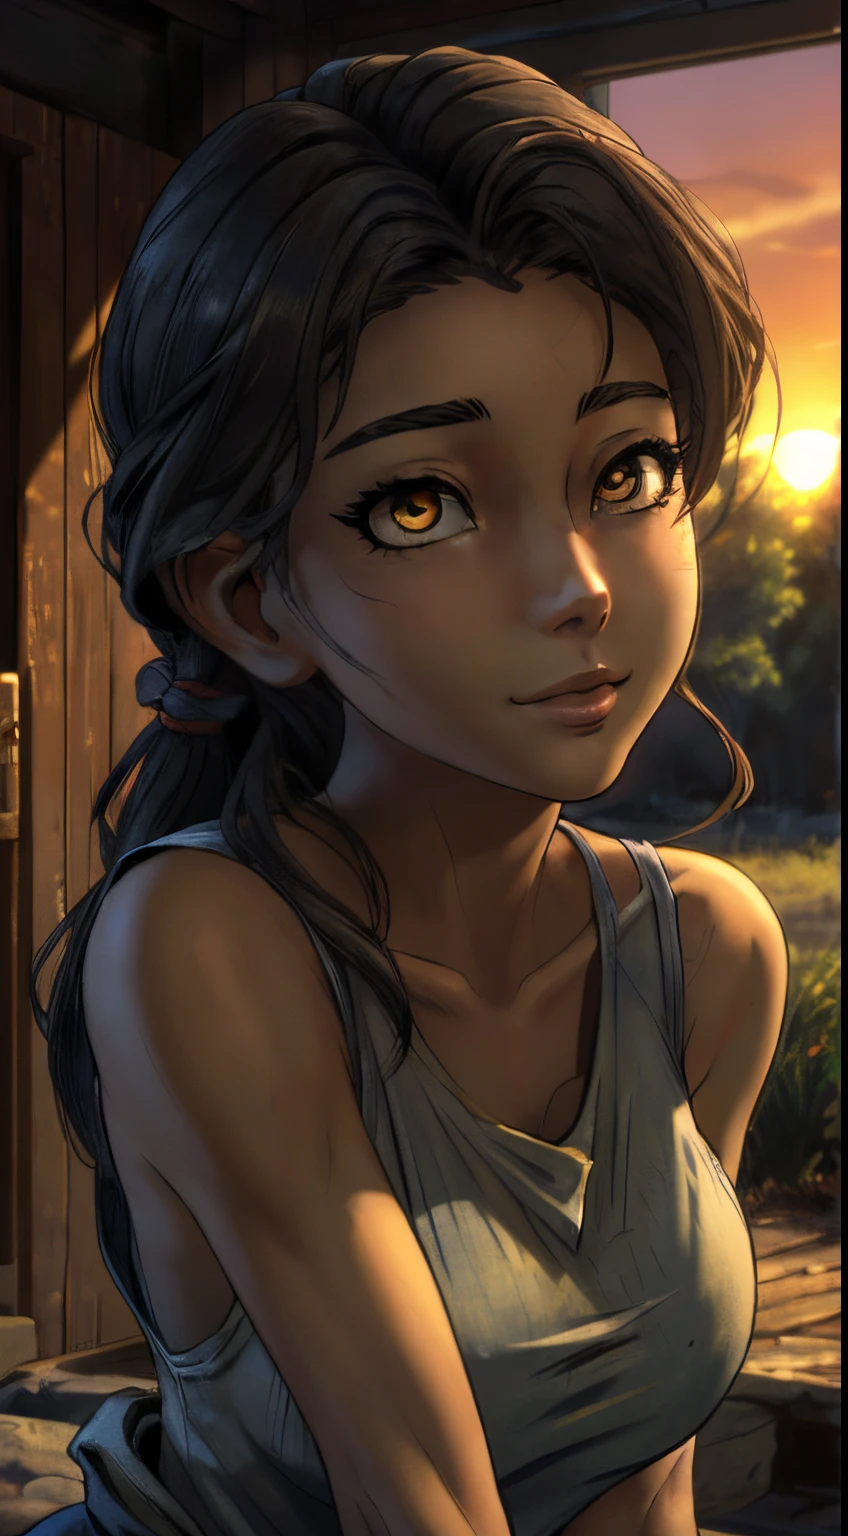 ((ultra quality)), ((tmasterpiece)), Clementine from the walking dead, ((Black, hairlong)) (Beautiful cute face), (beautiful female lips), Charming, ((aroused expression)), looks at the camera with a gentle smile, eyes are slightly closed, (skin color dark), Body glare, ((detailed beautiful female eyes)), ((dark yellow eyes)), (juicy female lips), (beautiful female hands), ((perfect female figure)), perfect female body, Beautiful waist, gorgeous big thighs, beautiful breasts, ((Subtle and beautiful)), stands, (close-up of the face), (wearing blue jeans, gray sleeveless tank) background: country house, backyard, evening, Beautiful sunset, ((Depth of field)), ((high quality clear image)), (crisp details), ((higly detailed)), Realistic, Professional Photo Session, ((Clear Focus)), the anime